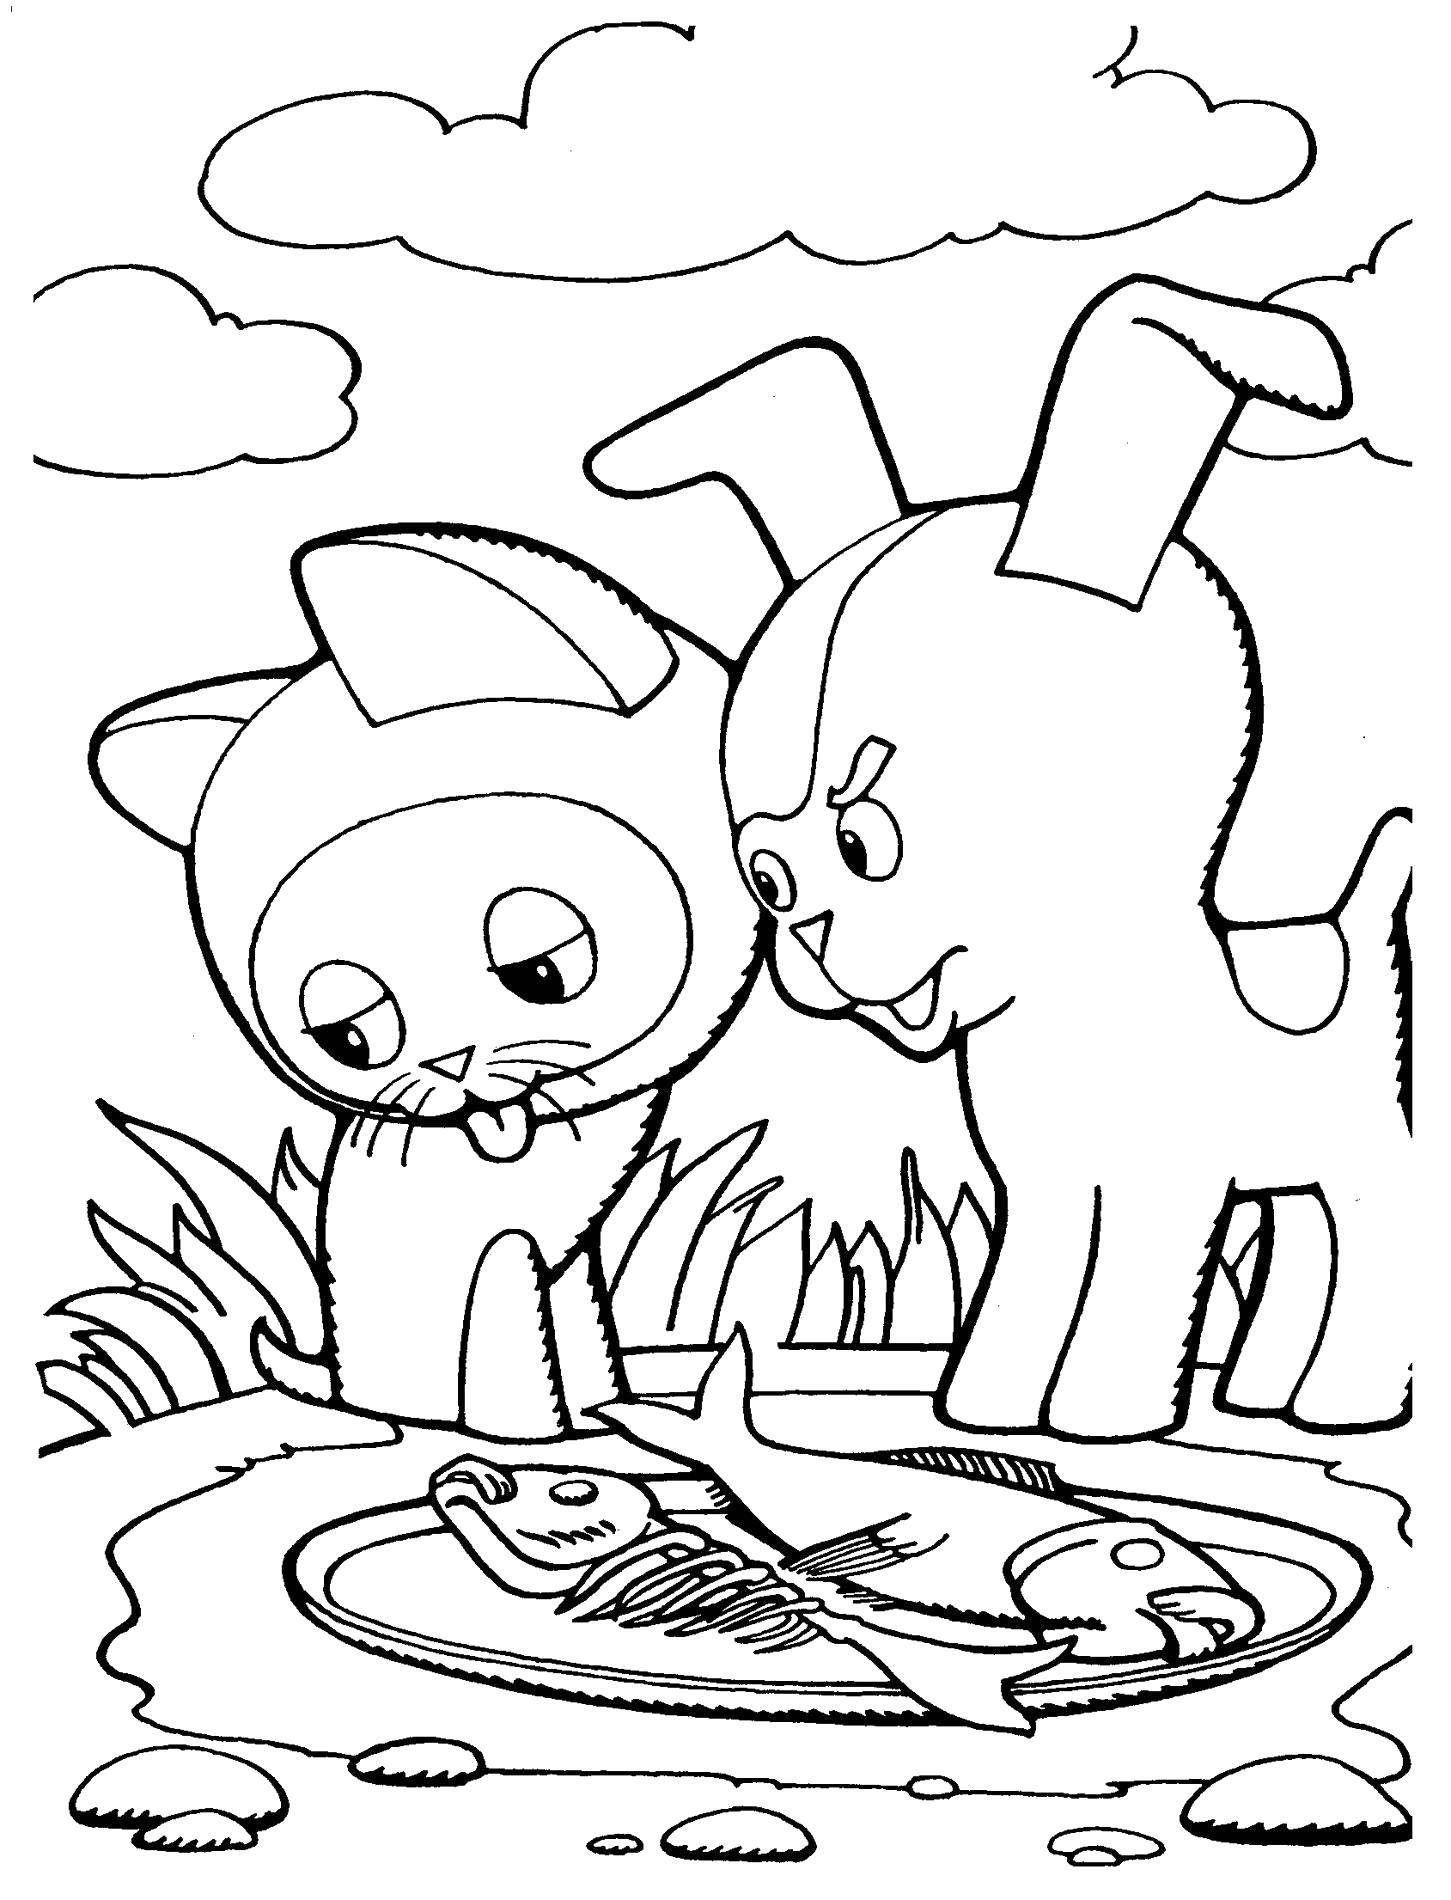 Coloring Kitten named woof and puppy. Category Fairy tales. Tags:  Tales, "Kitten named woof".